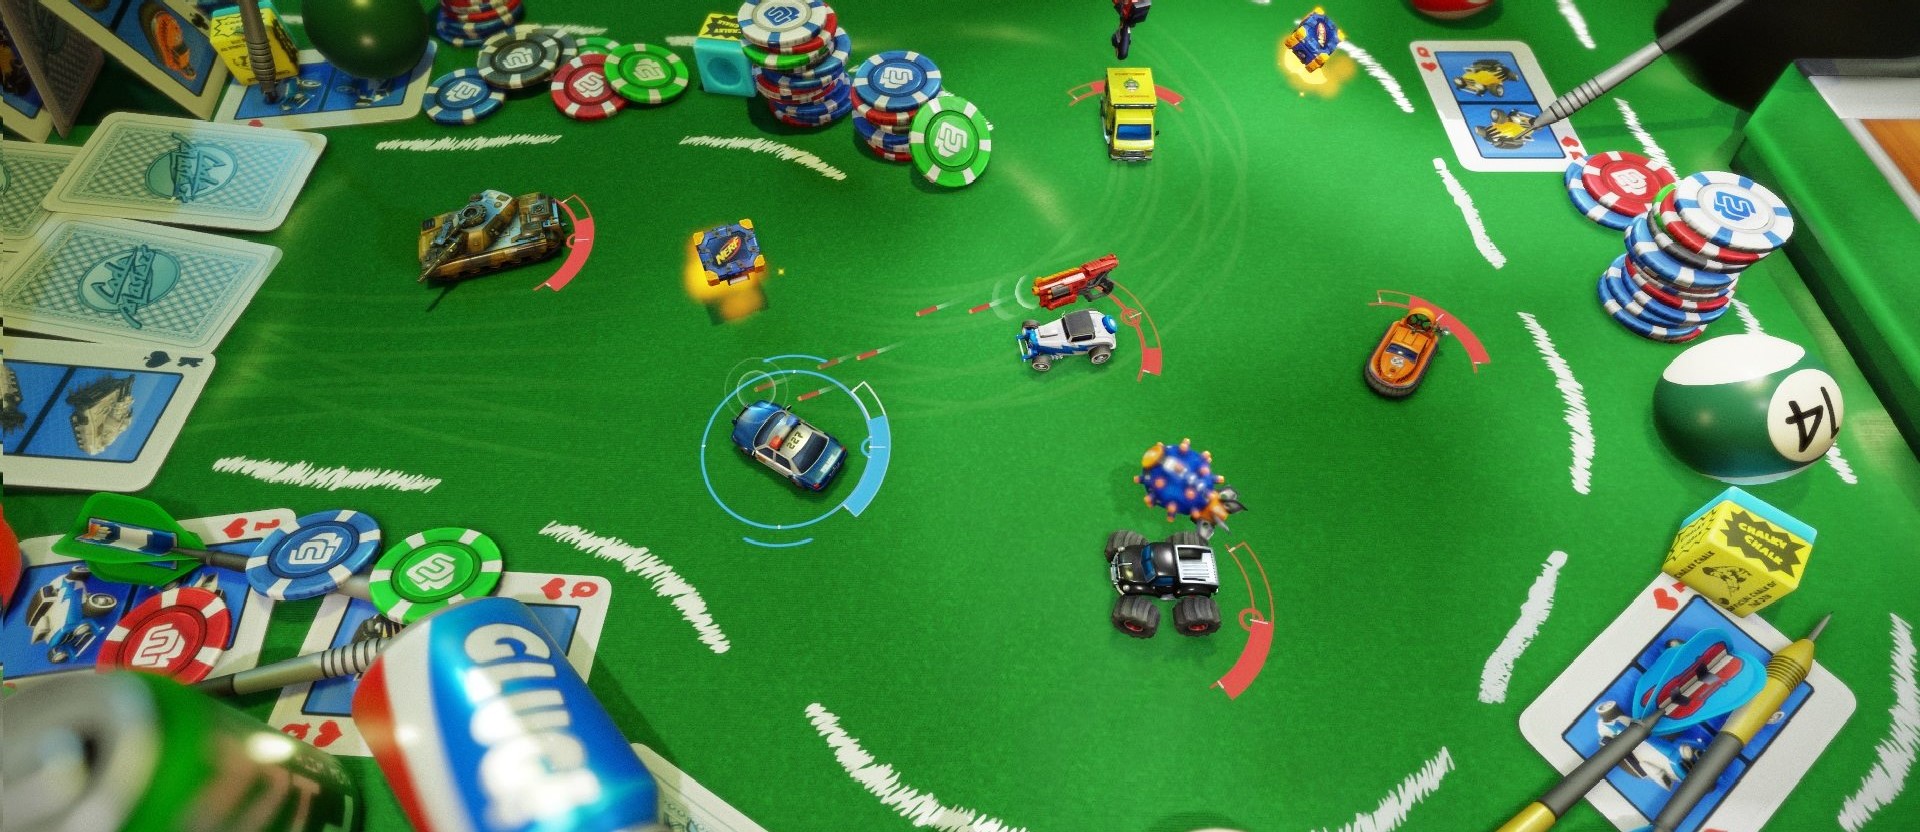 Micro Machines World Series trailer – The Thrill of the Race!